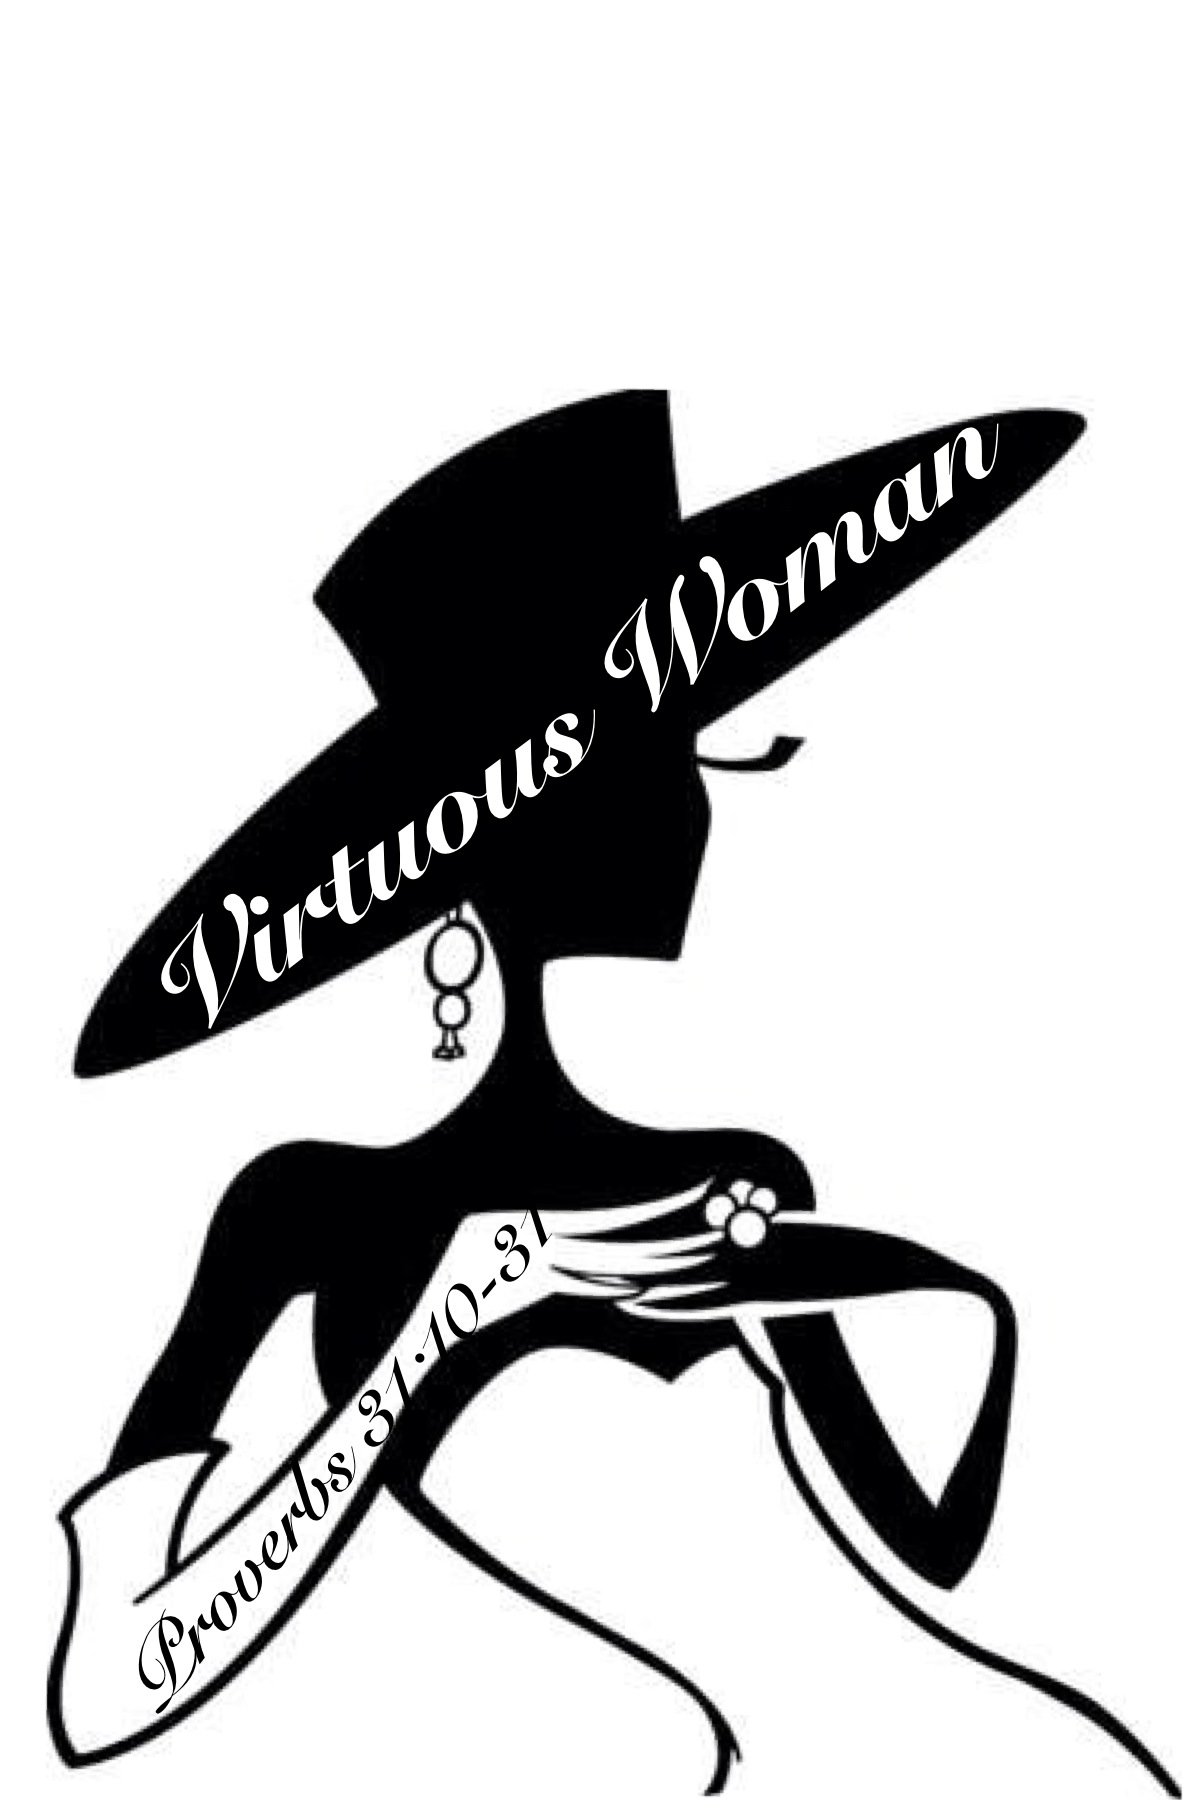 Download Virtuous Woman / Men of Valor Conference Tickets, Fri, Sep 27, 2013 at 6:00 PM | Eventbrite